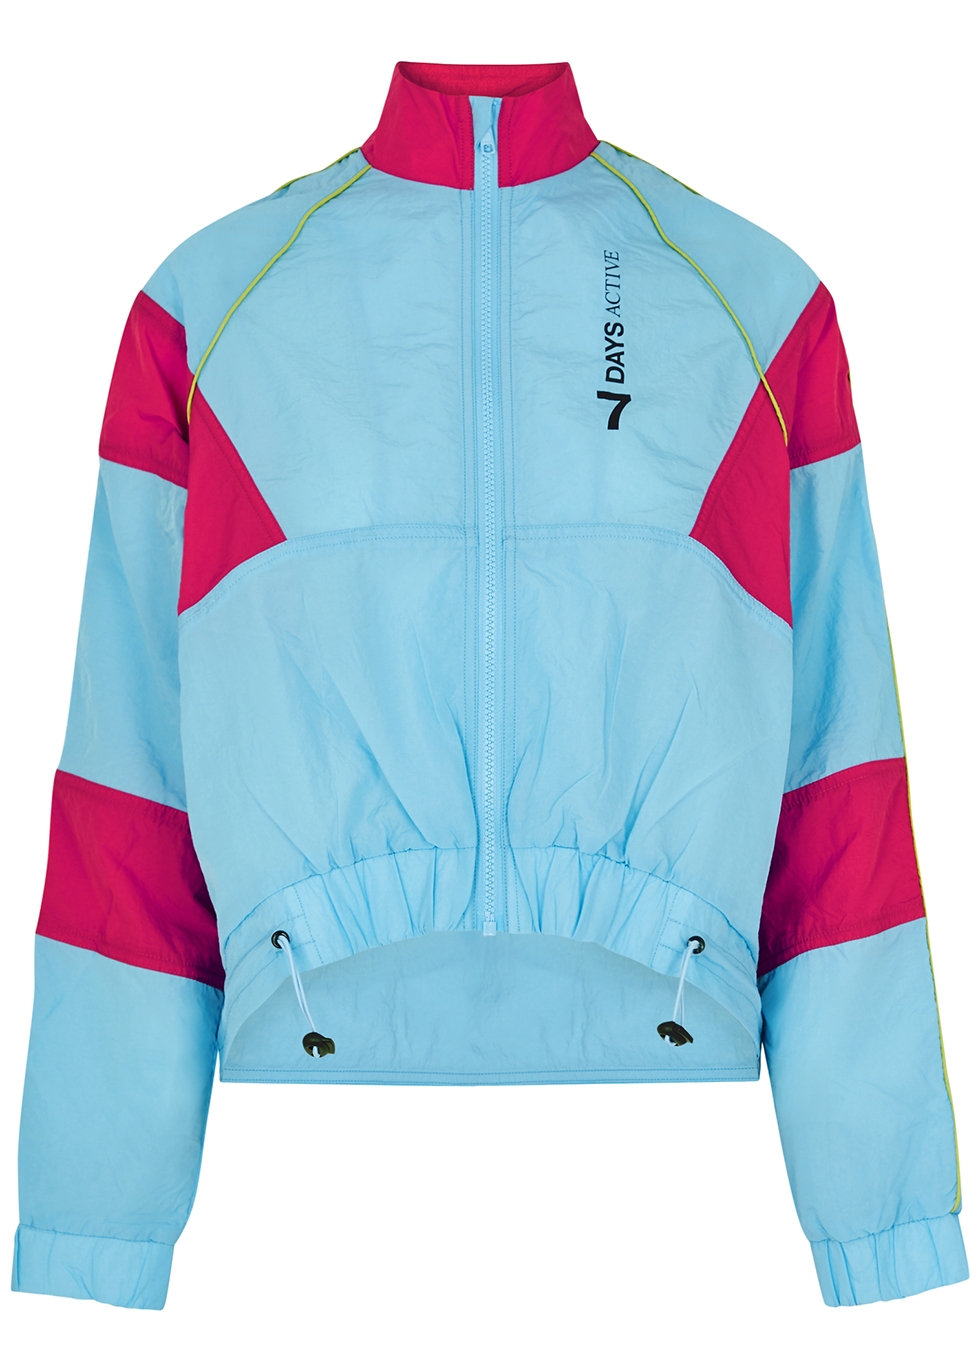 7 DAYS ACTIVE ASANTE BLUE PANELLED SHELL JACKET